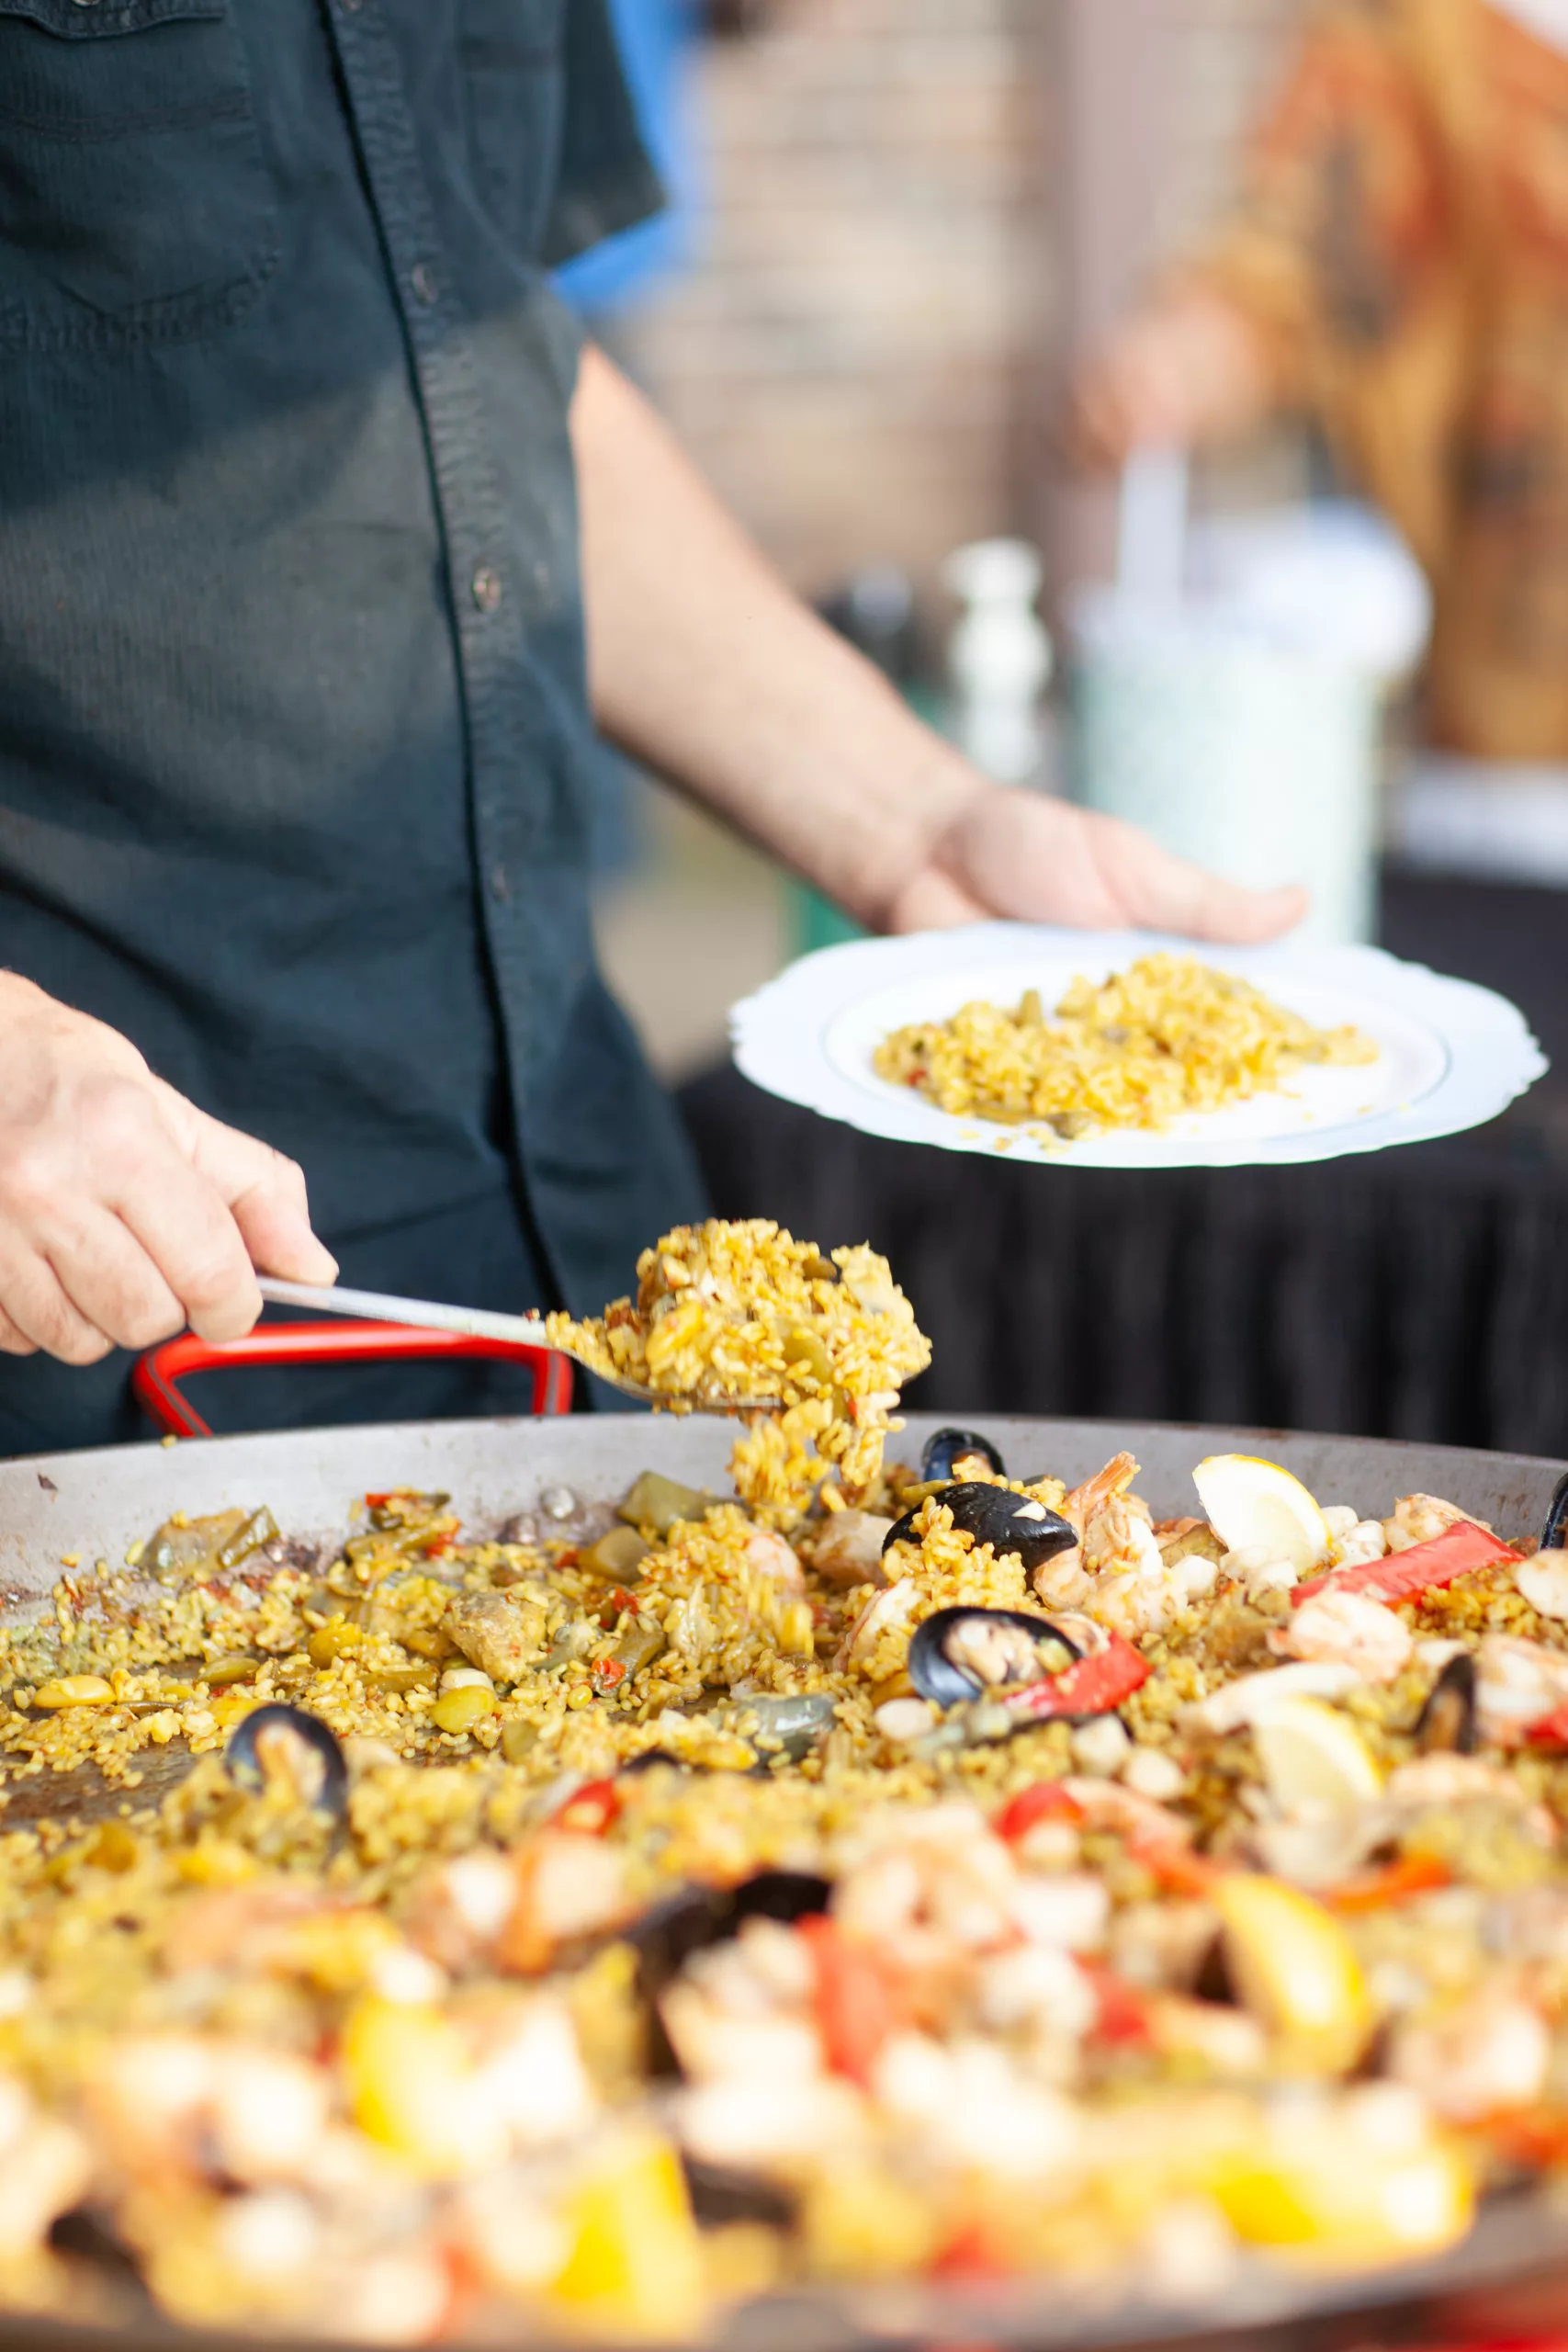 Real Paella Catering at an event